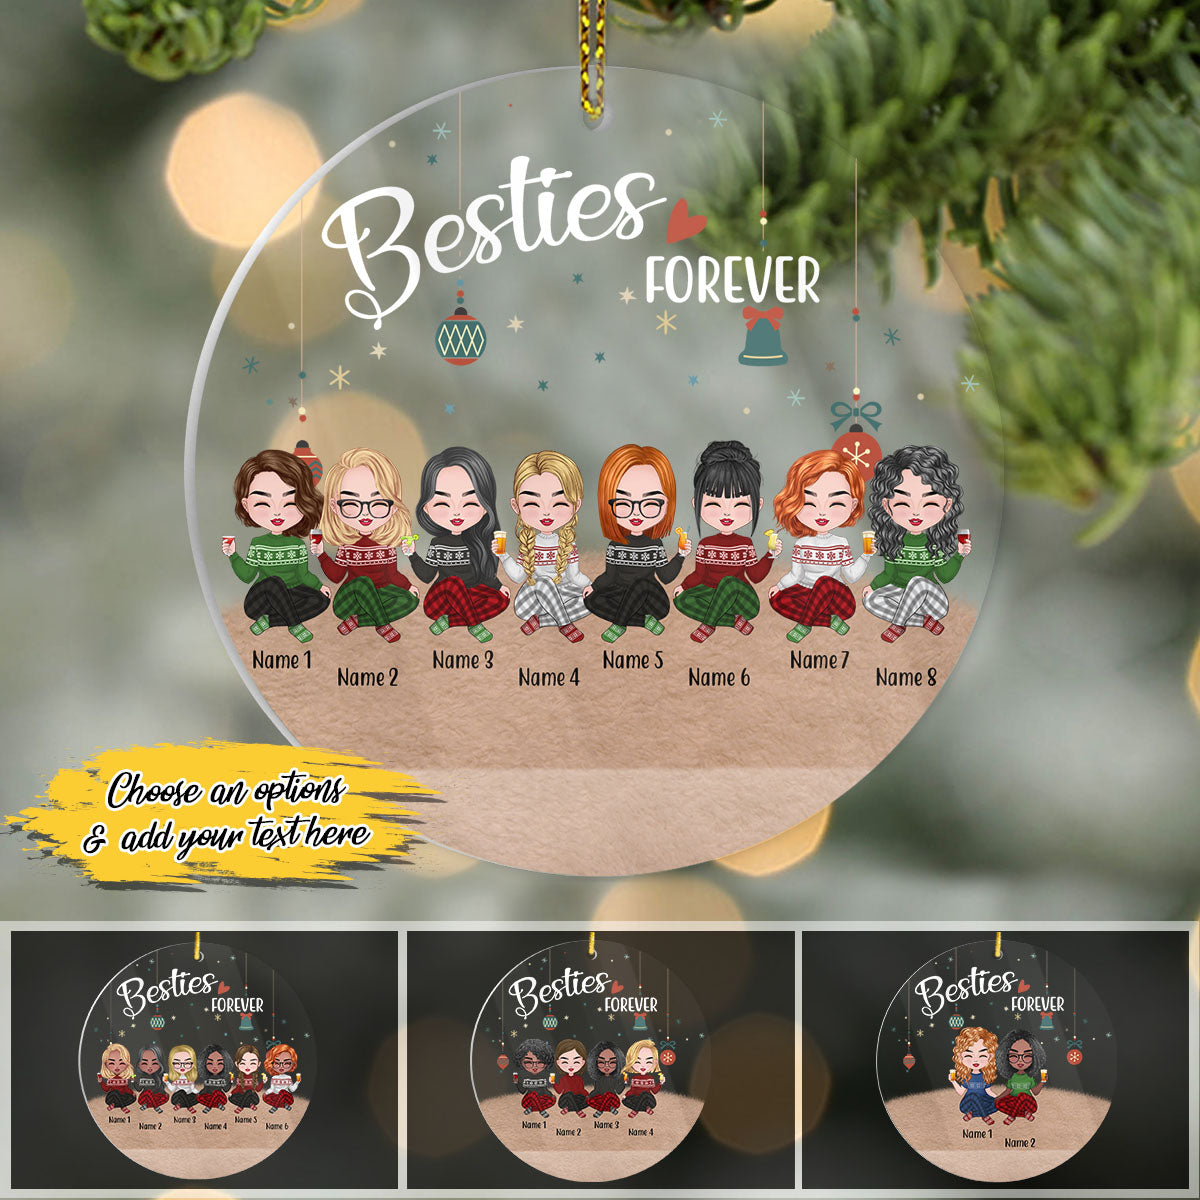 Besties Forever Personalized Custom Name Shaped Transparent Ornaments - Christmas Gift For Family, Dad, Mom, Sisters, Brothers